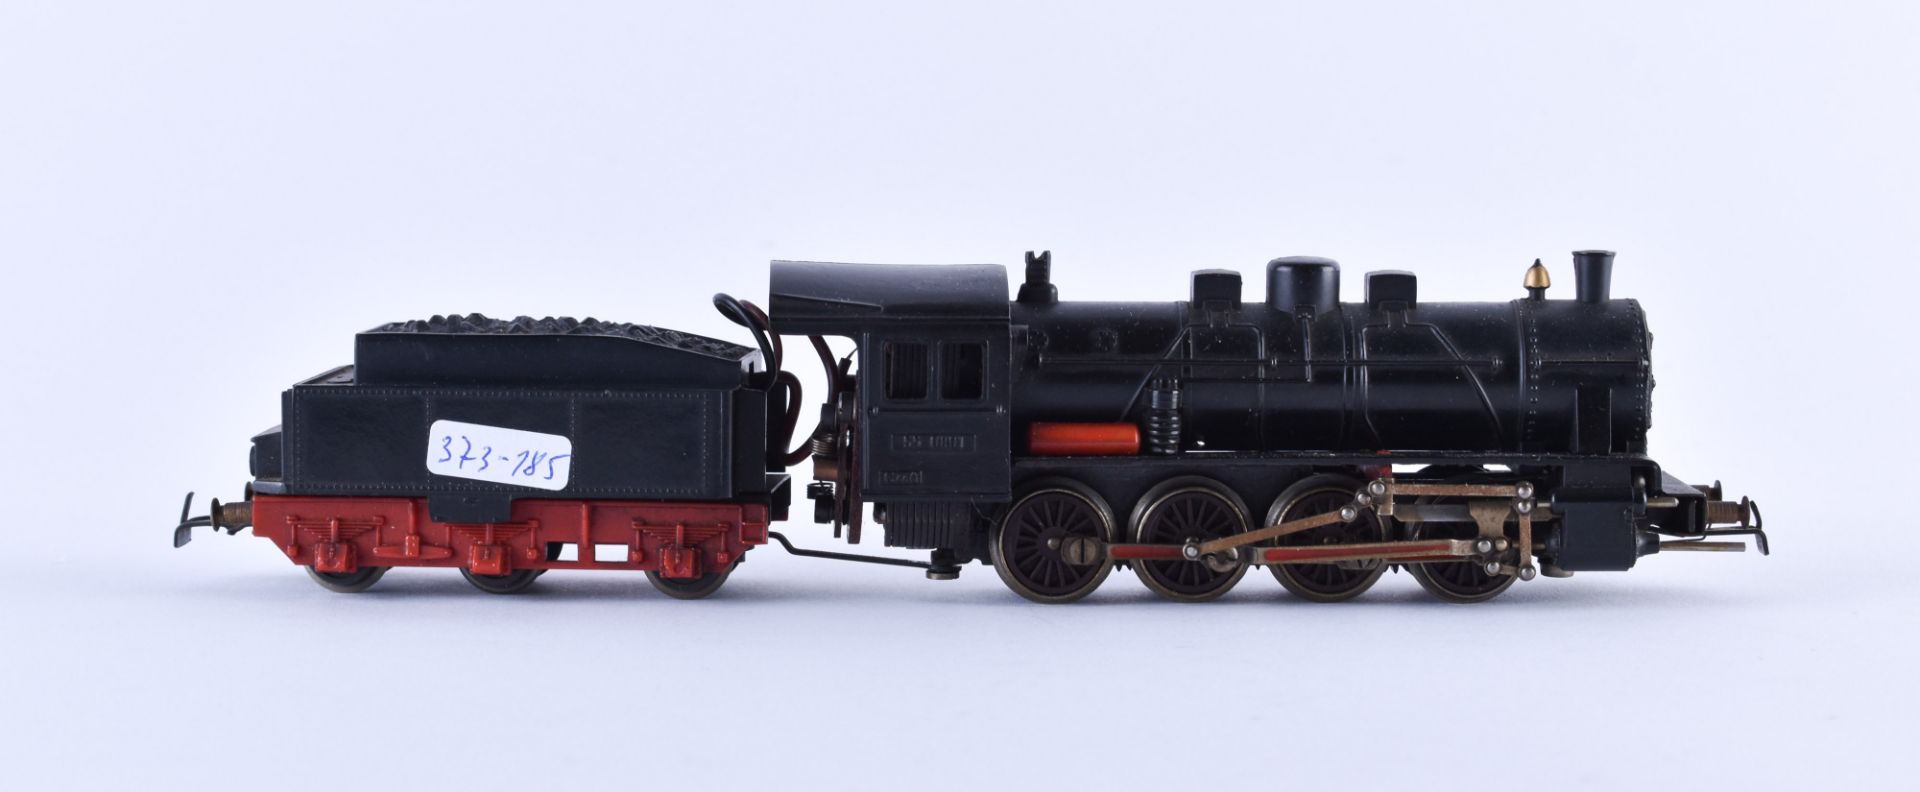 Steam locomotive with tender 550801 DR, Piko - Image 2 of 2